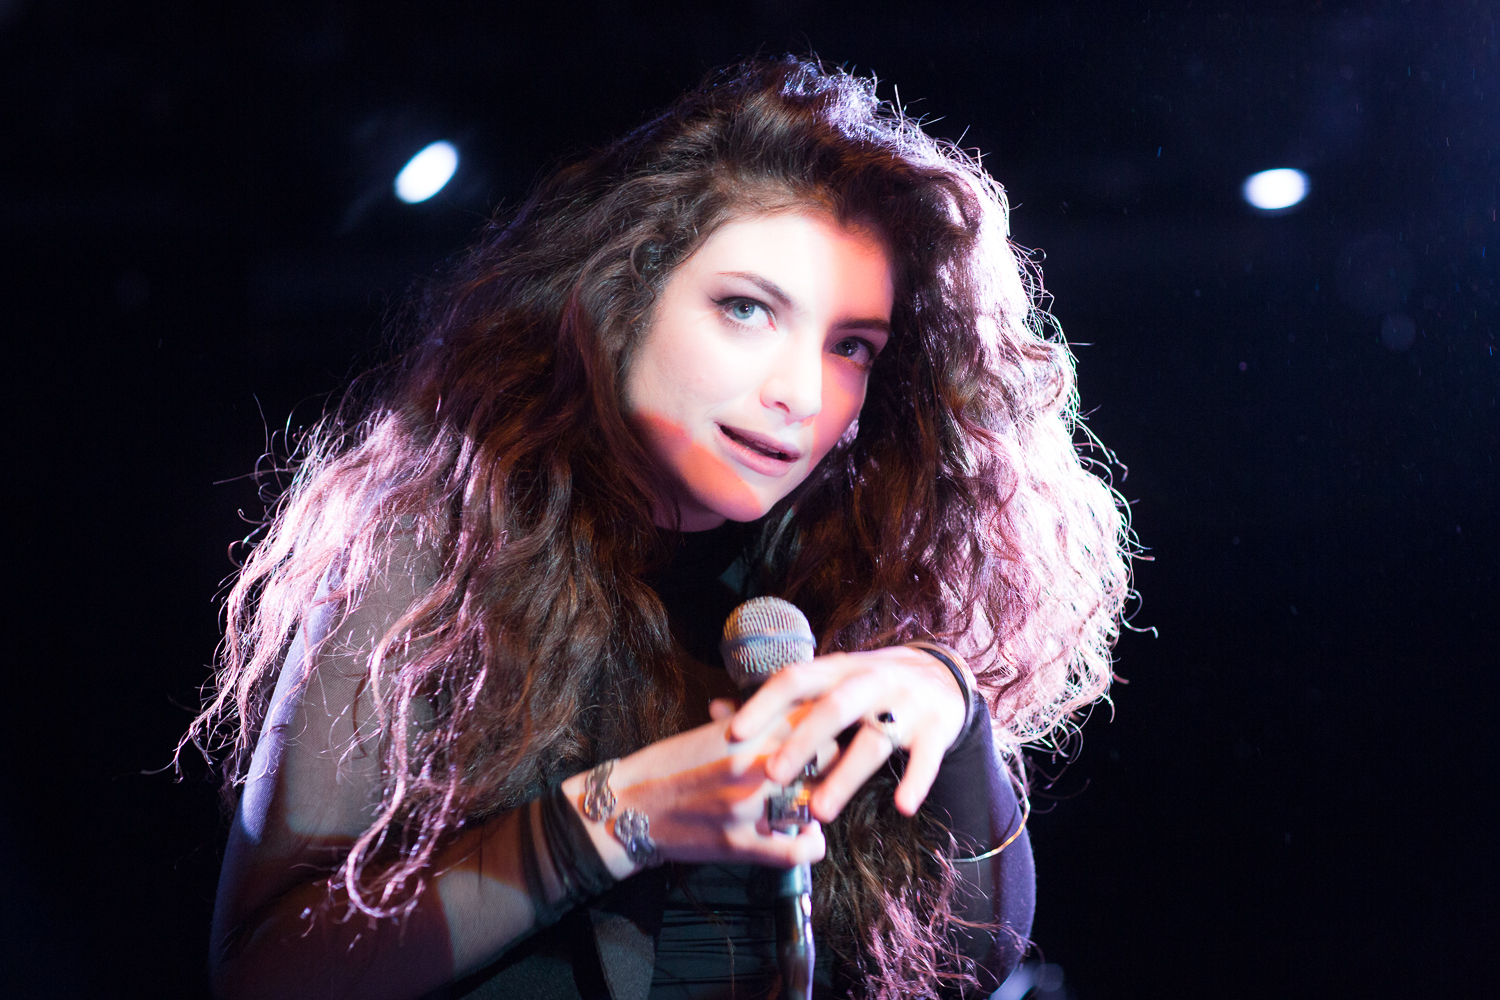 LORDE US Debut Performance at Le Poisson Rouge on August 6, 2013